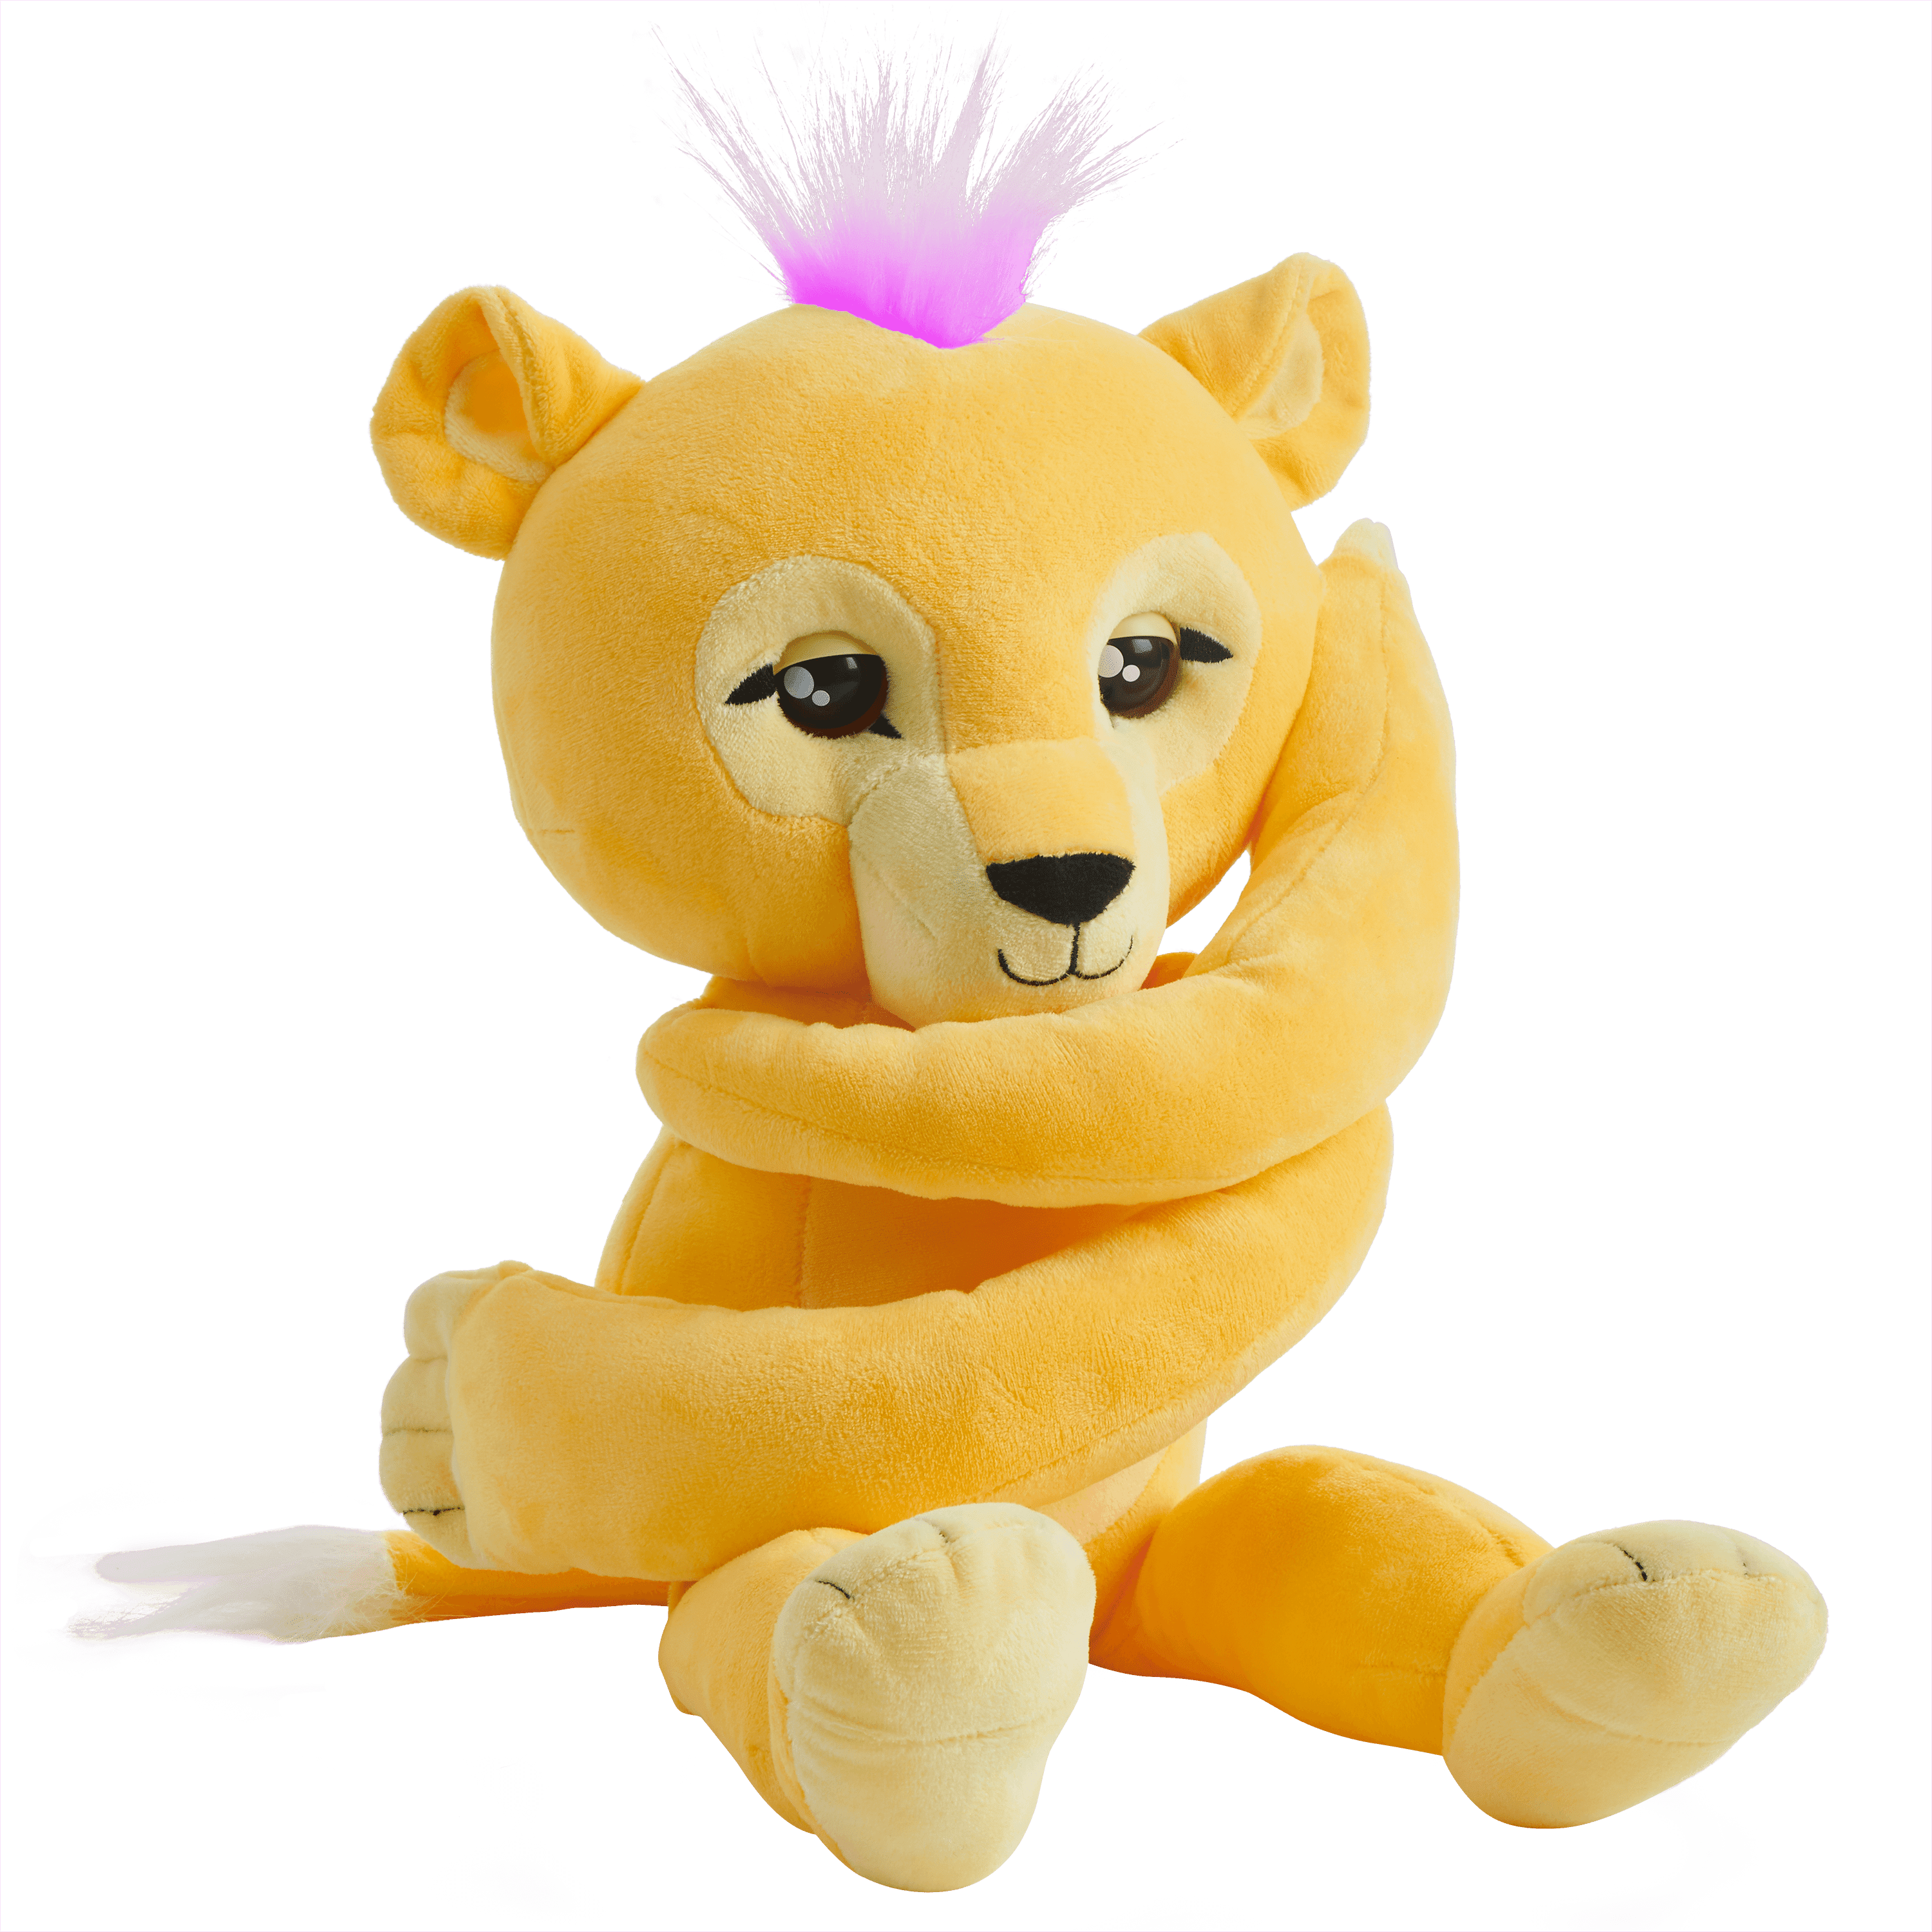 Details about   Fingerlings HUGS - Interactive Plush Lion NEW IN BOX Yellow Sam 